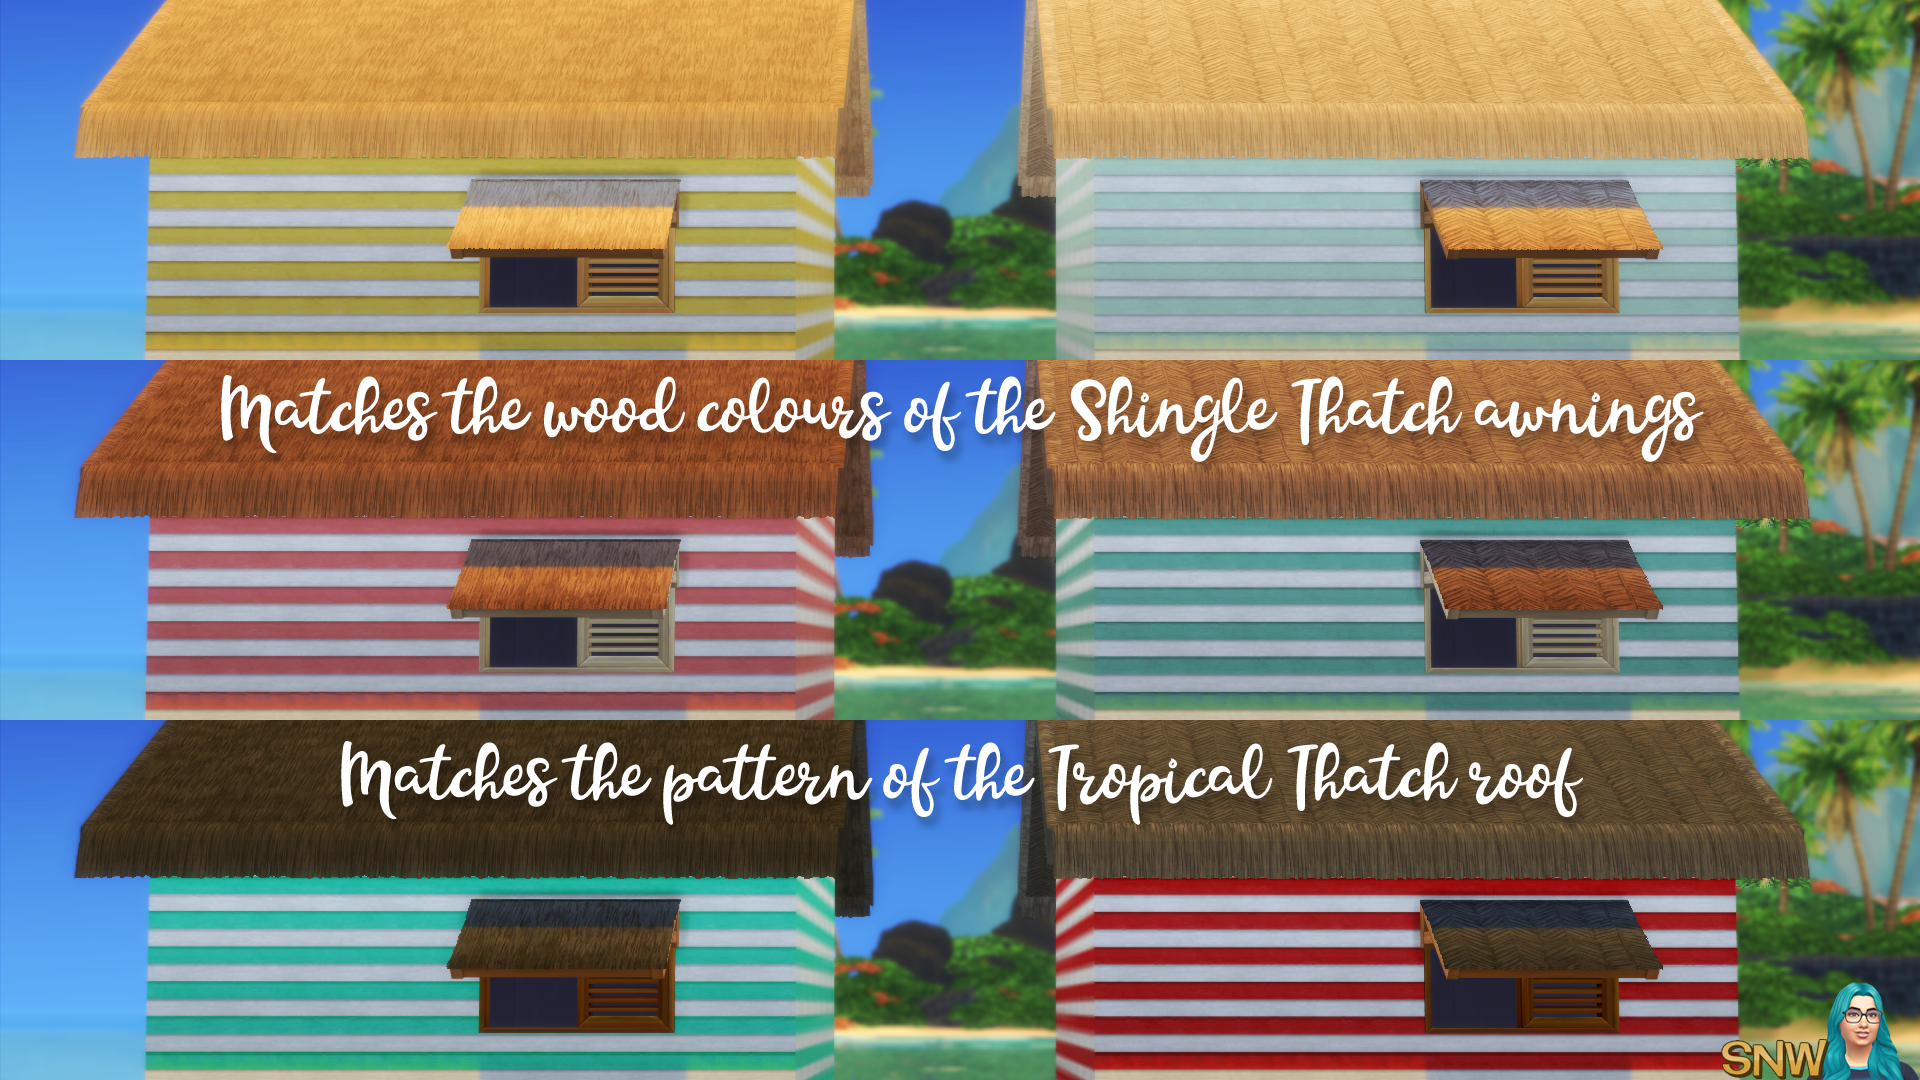 Tropical Thatch Awnings (matches the Tropical Thatch roof from Island Living)